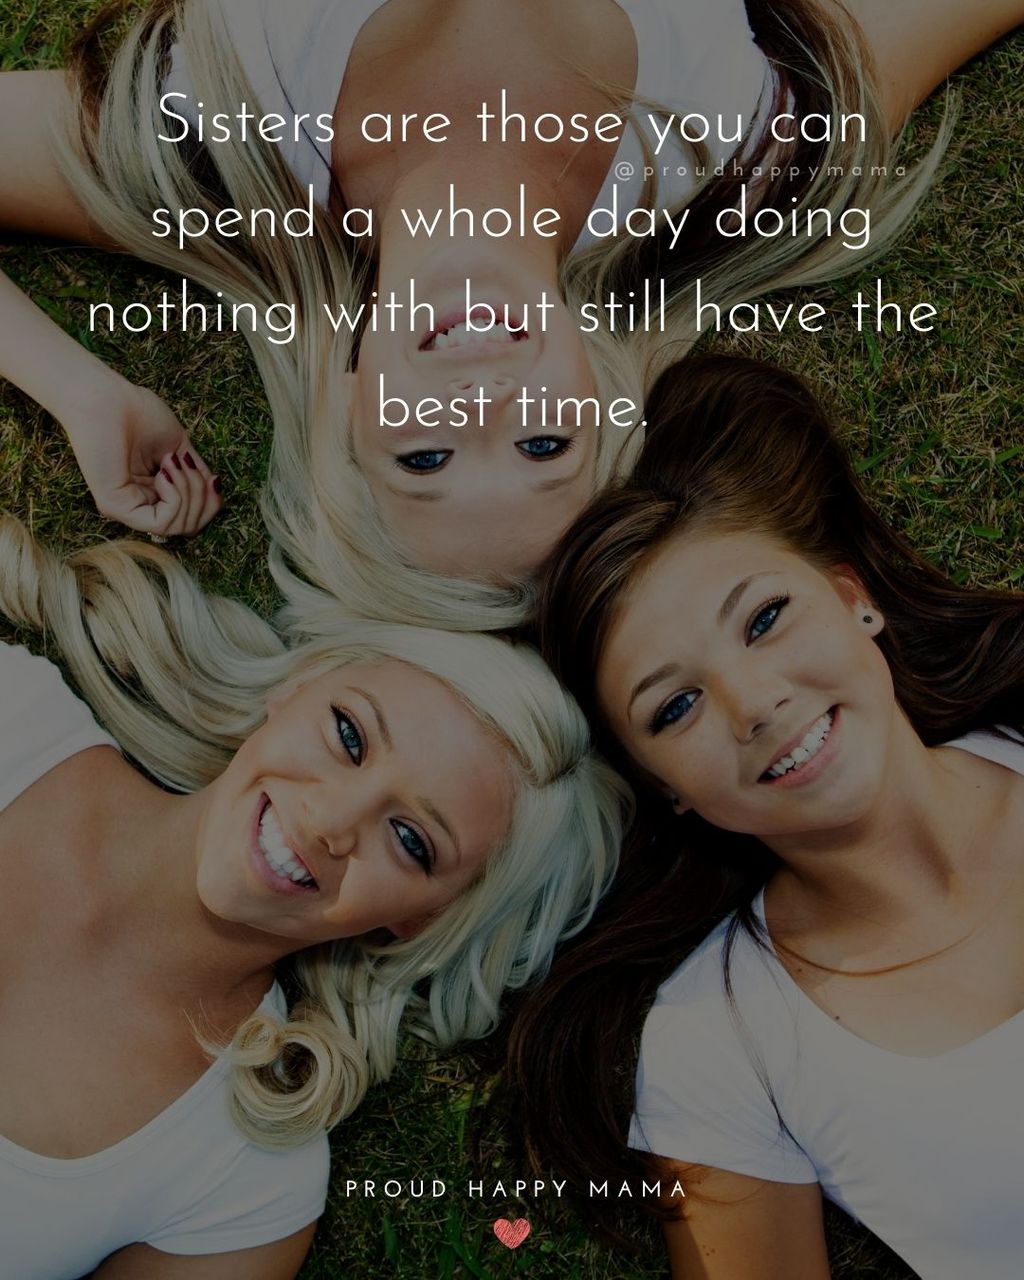 Sister Quotes - Sisters are those you can spend a whole day doing nothing with but still have the best time.